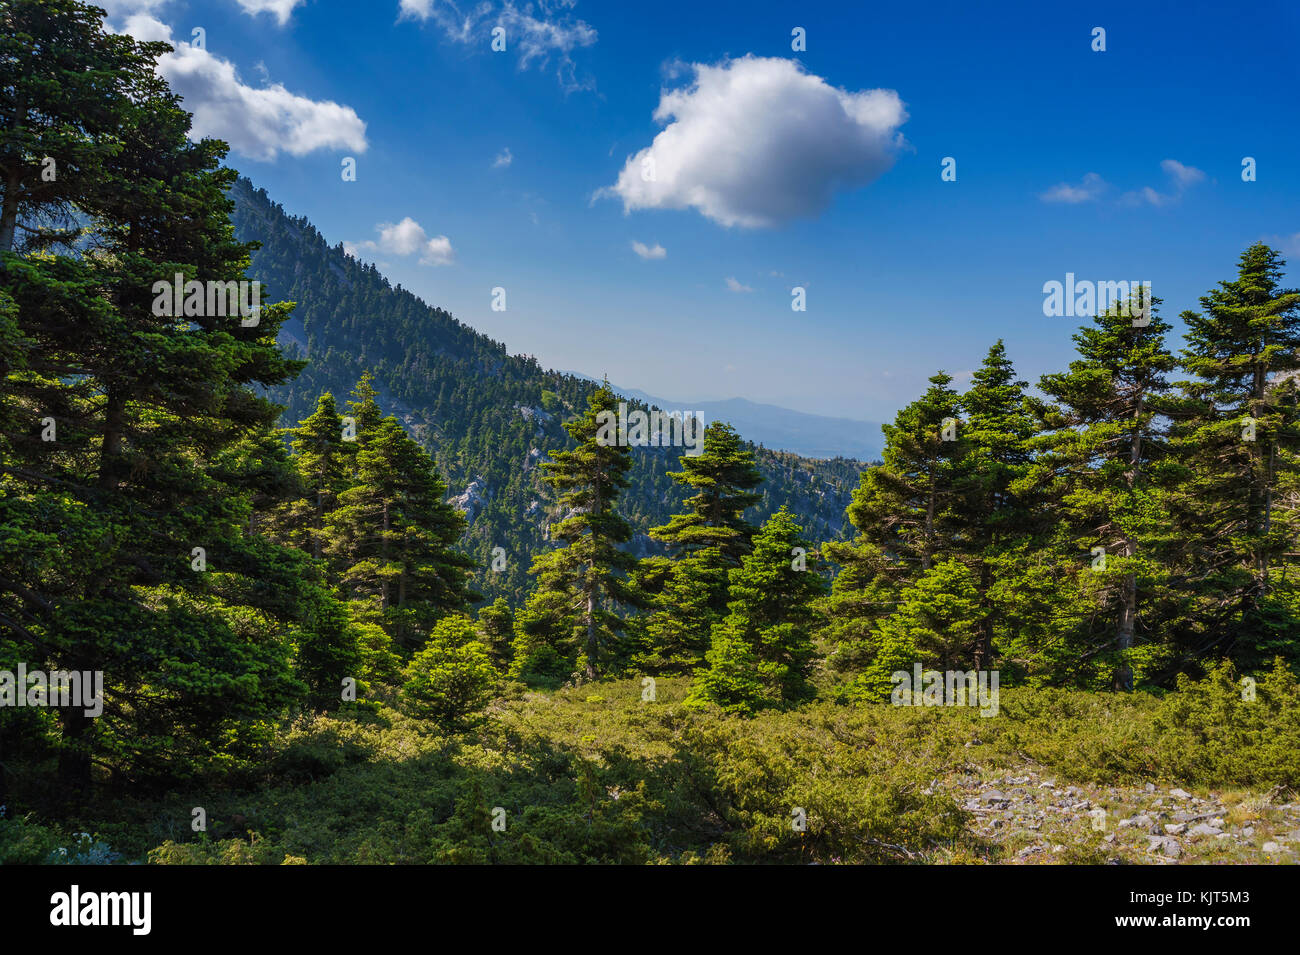 The famous Dirfys (or Dirfi) forest. It is a natural forest located on a mountain in the central part of the island of Euboea, Greece at 1,743 m. Stock Photo